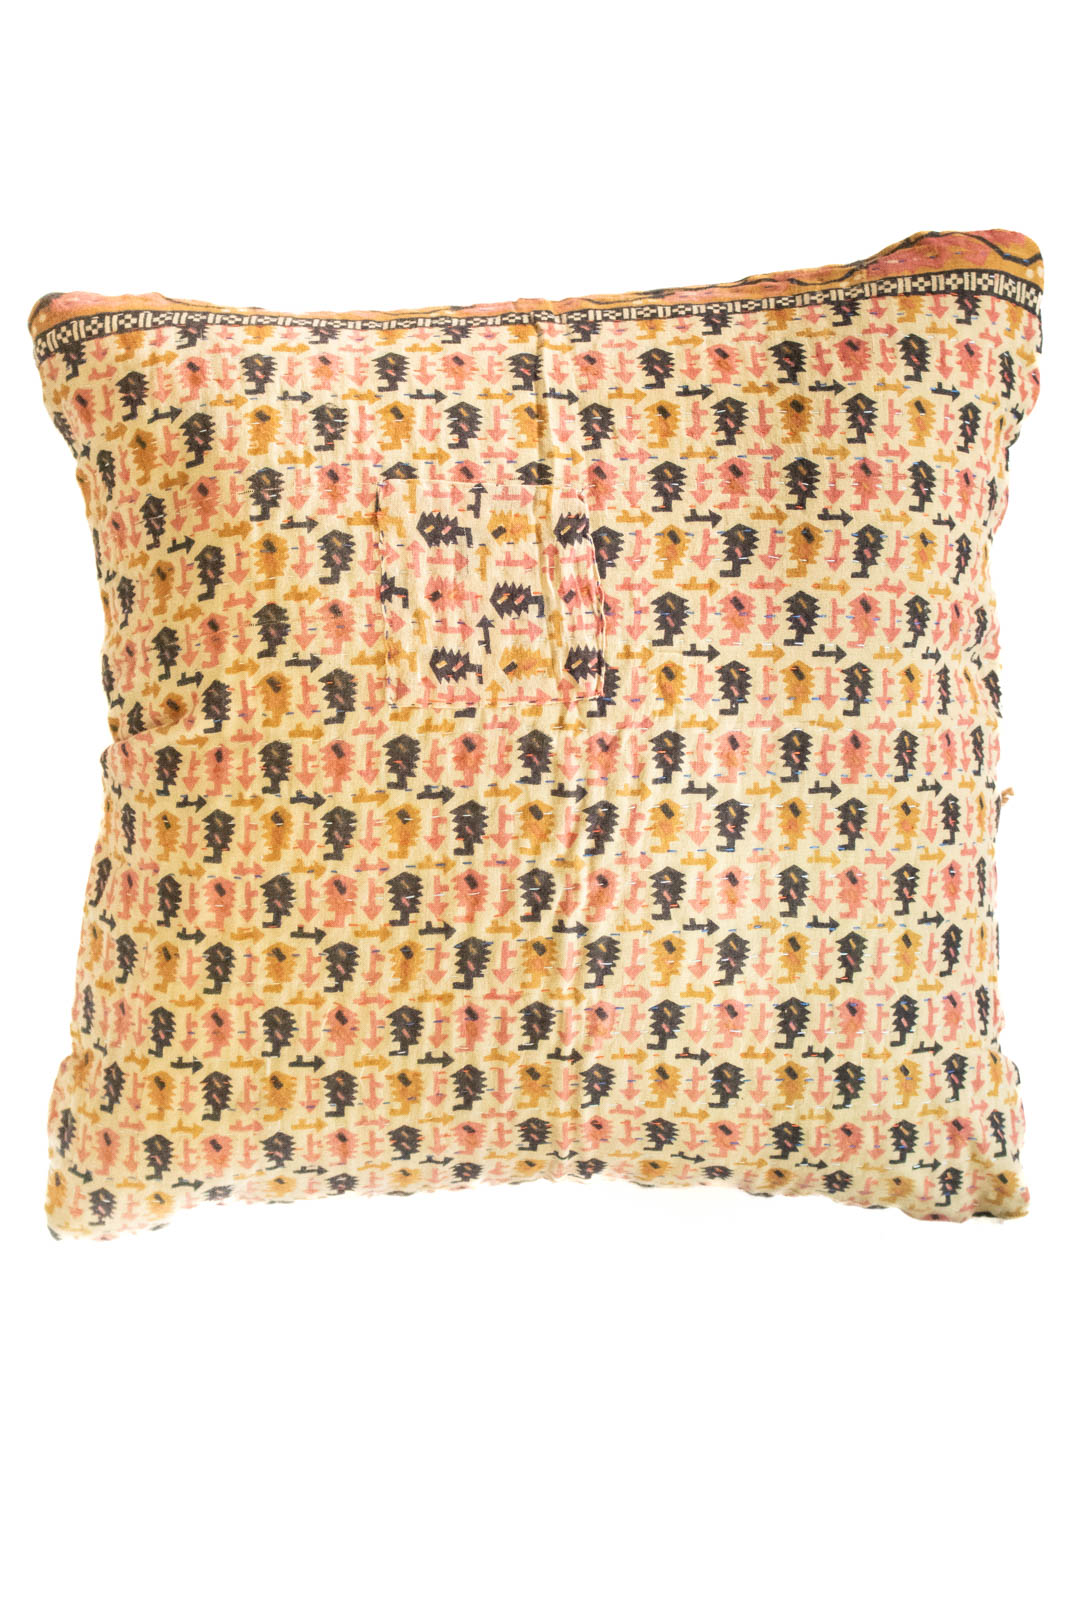 Fearless no. 2 Kantha Pillow Cover